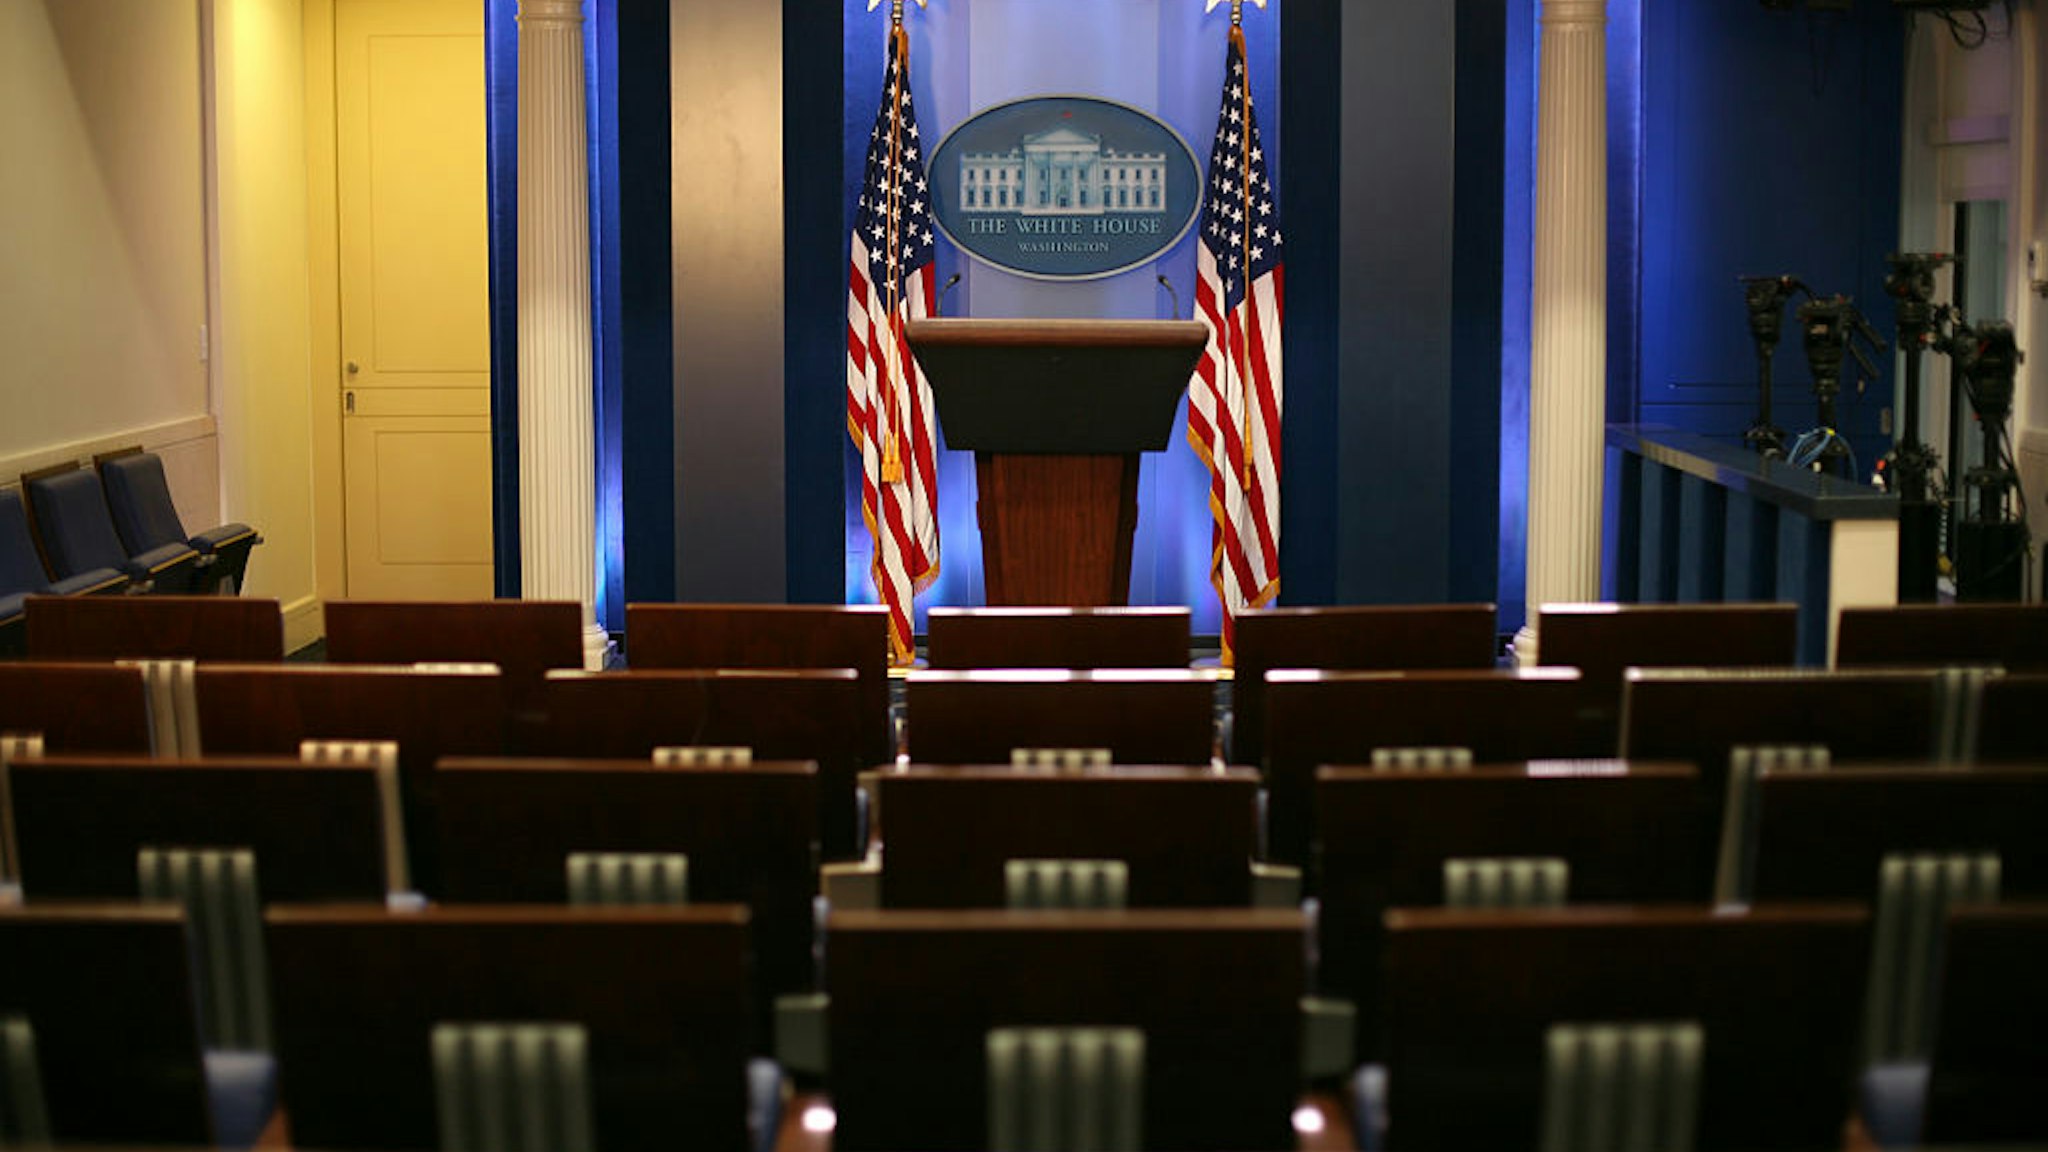 The White House press briefing room. (Photo by Ken Cedeno/Corbis via Getty Images)